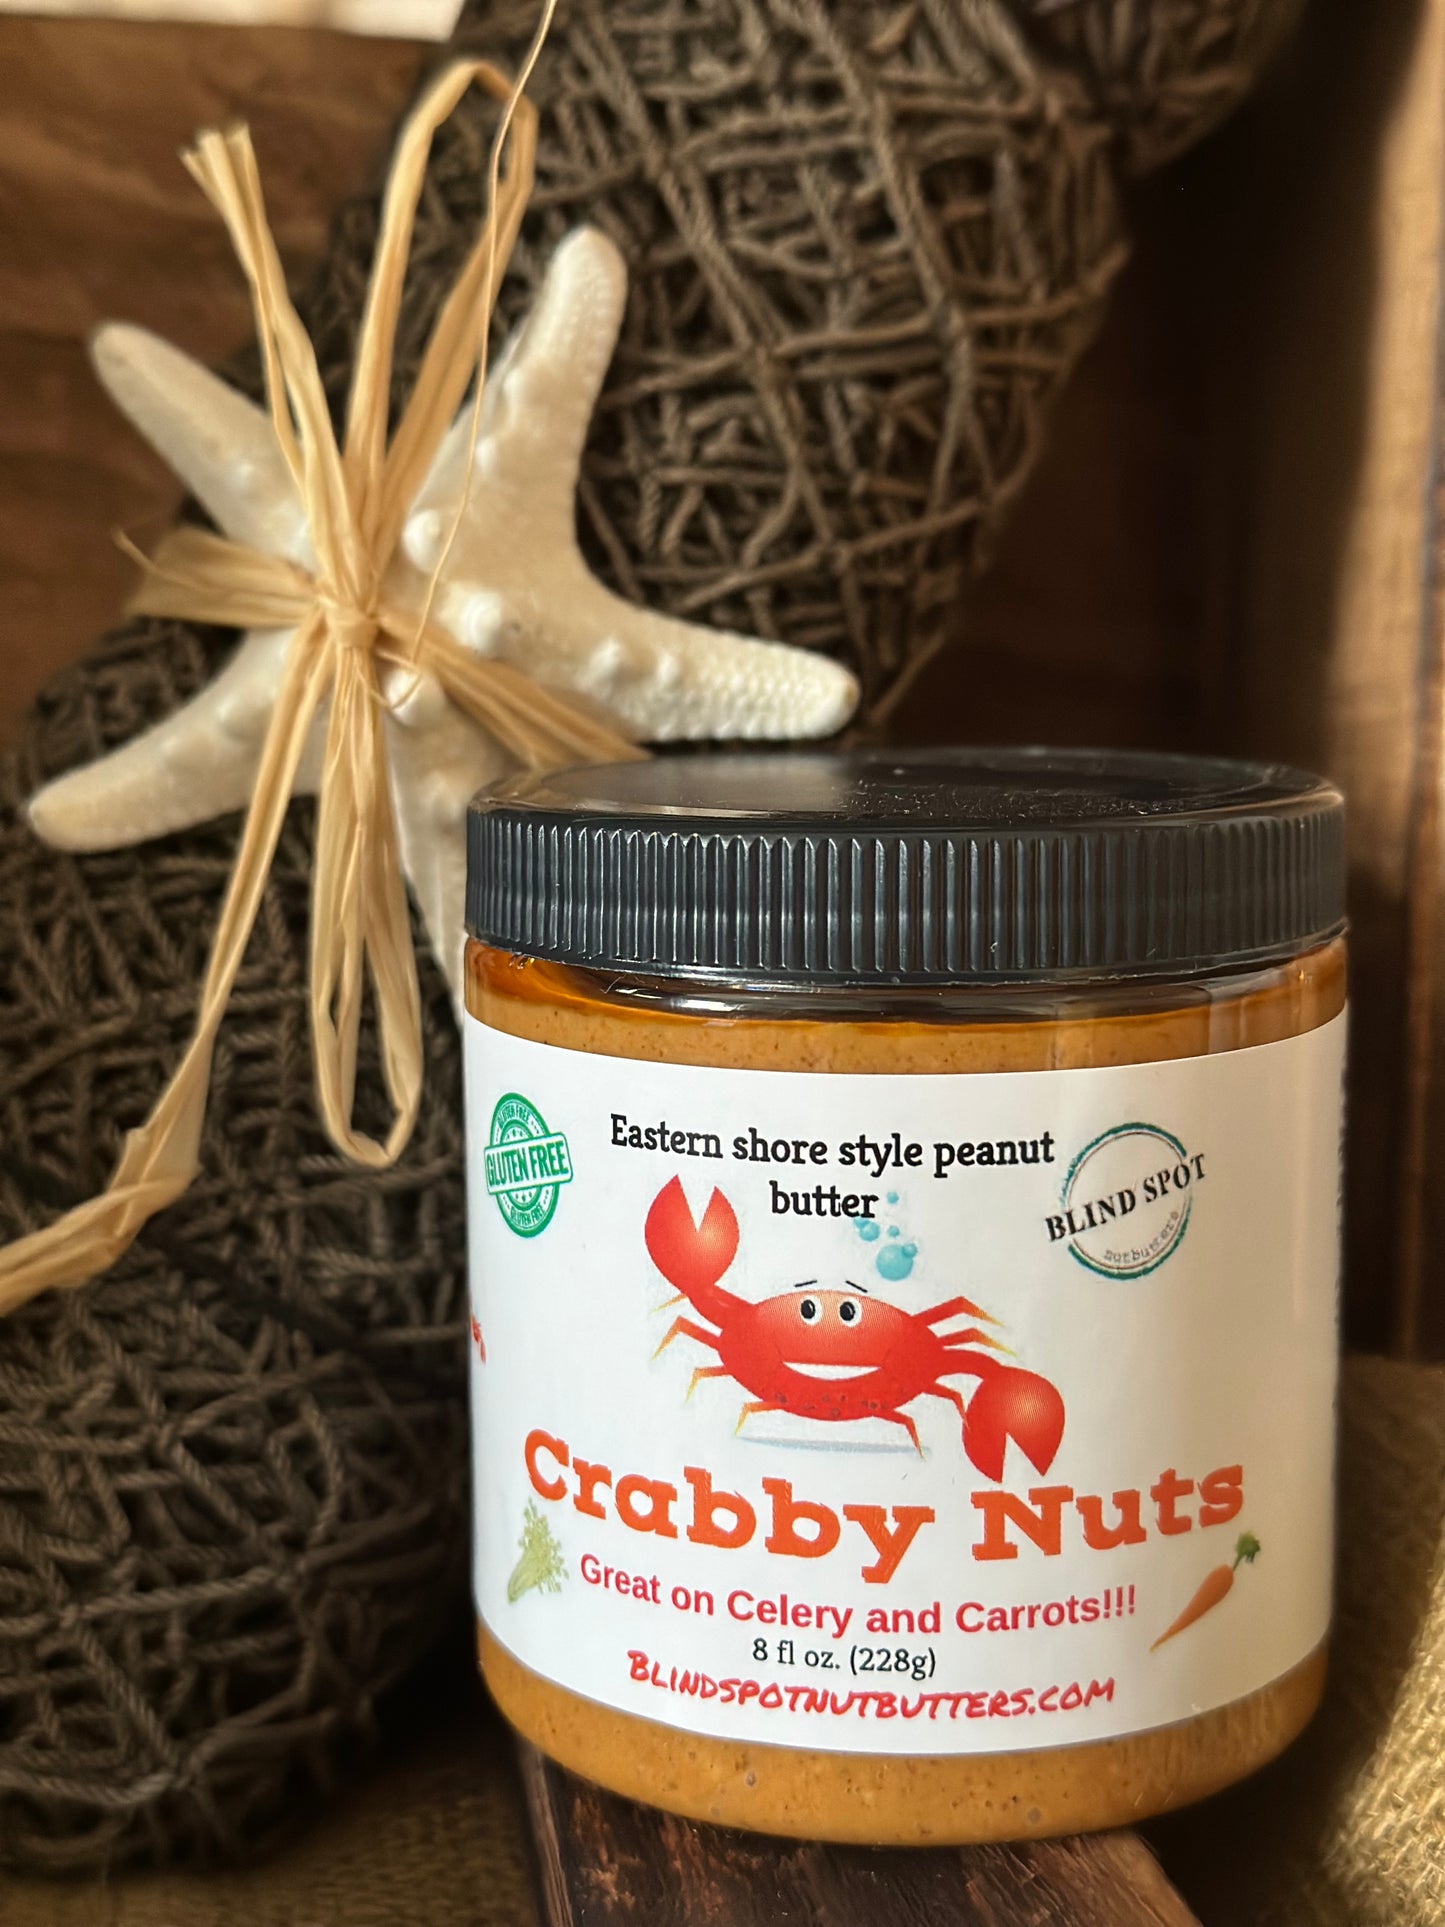 Crabby Nuts - have friends that love Old Bay? Great gift idea!